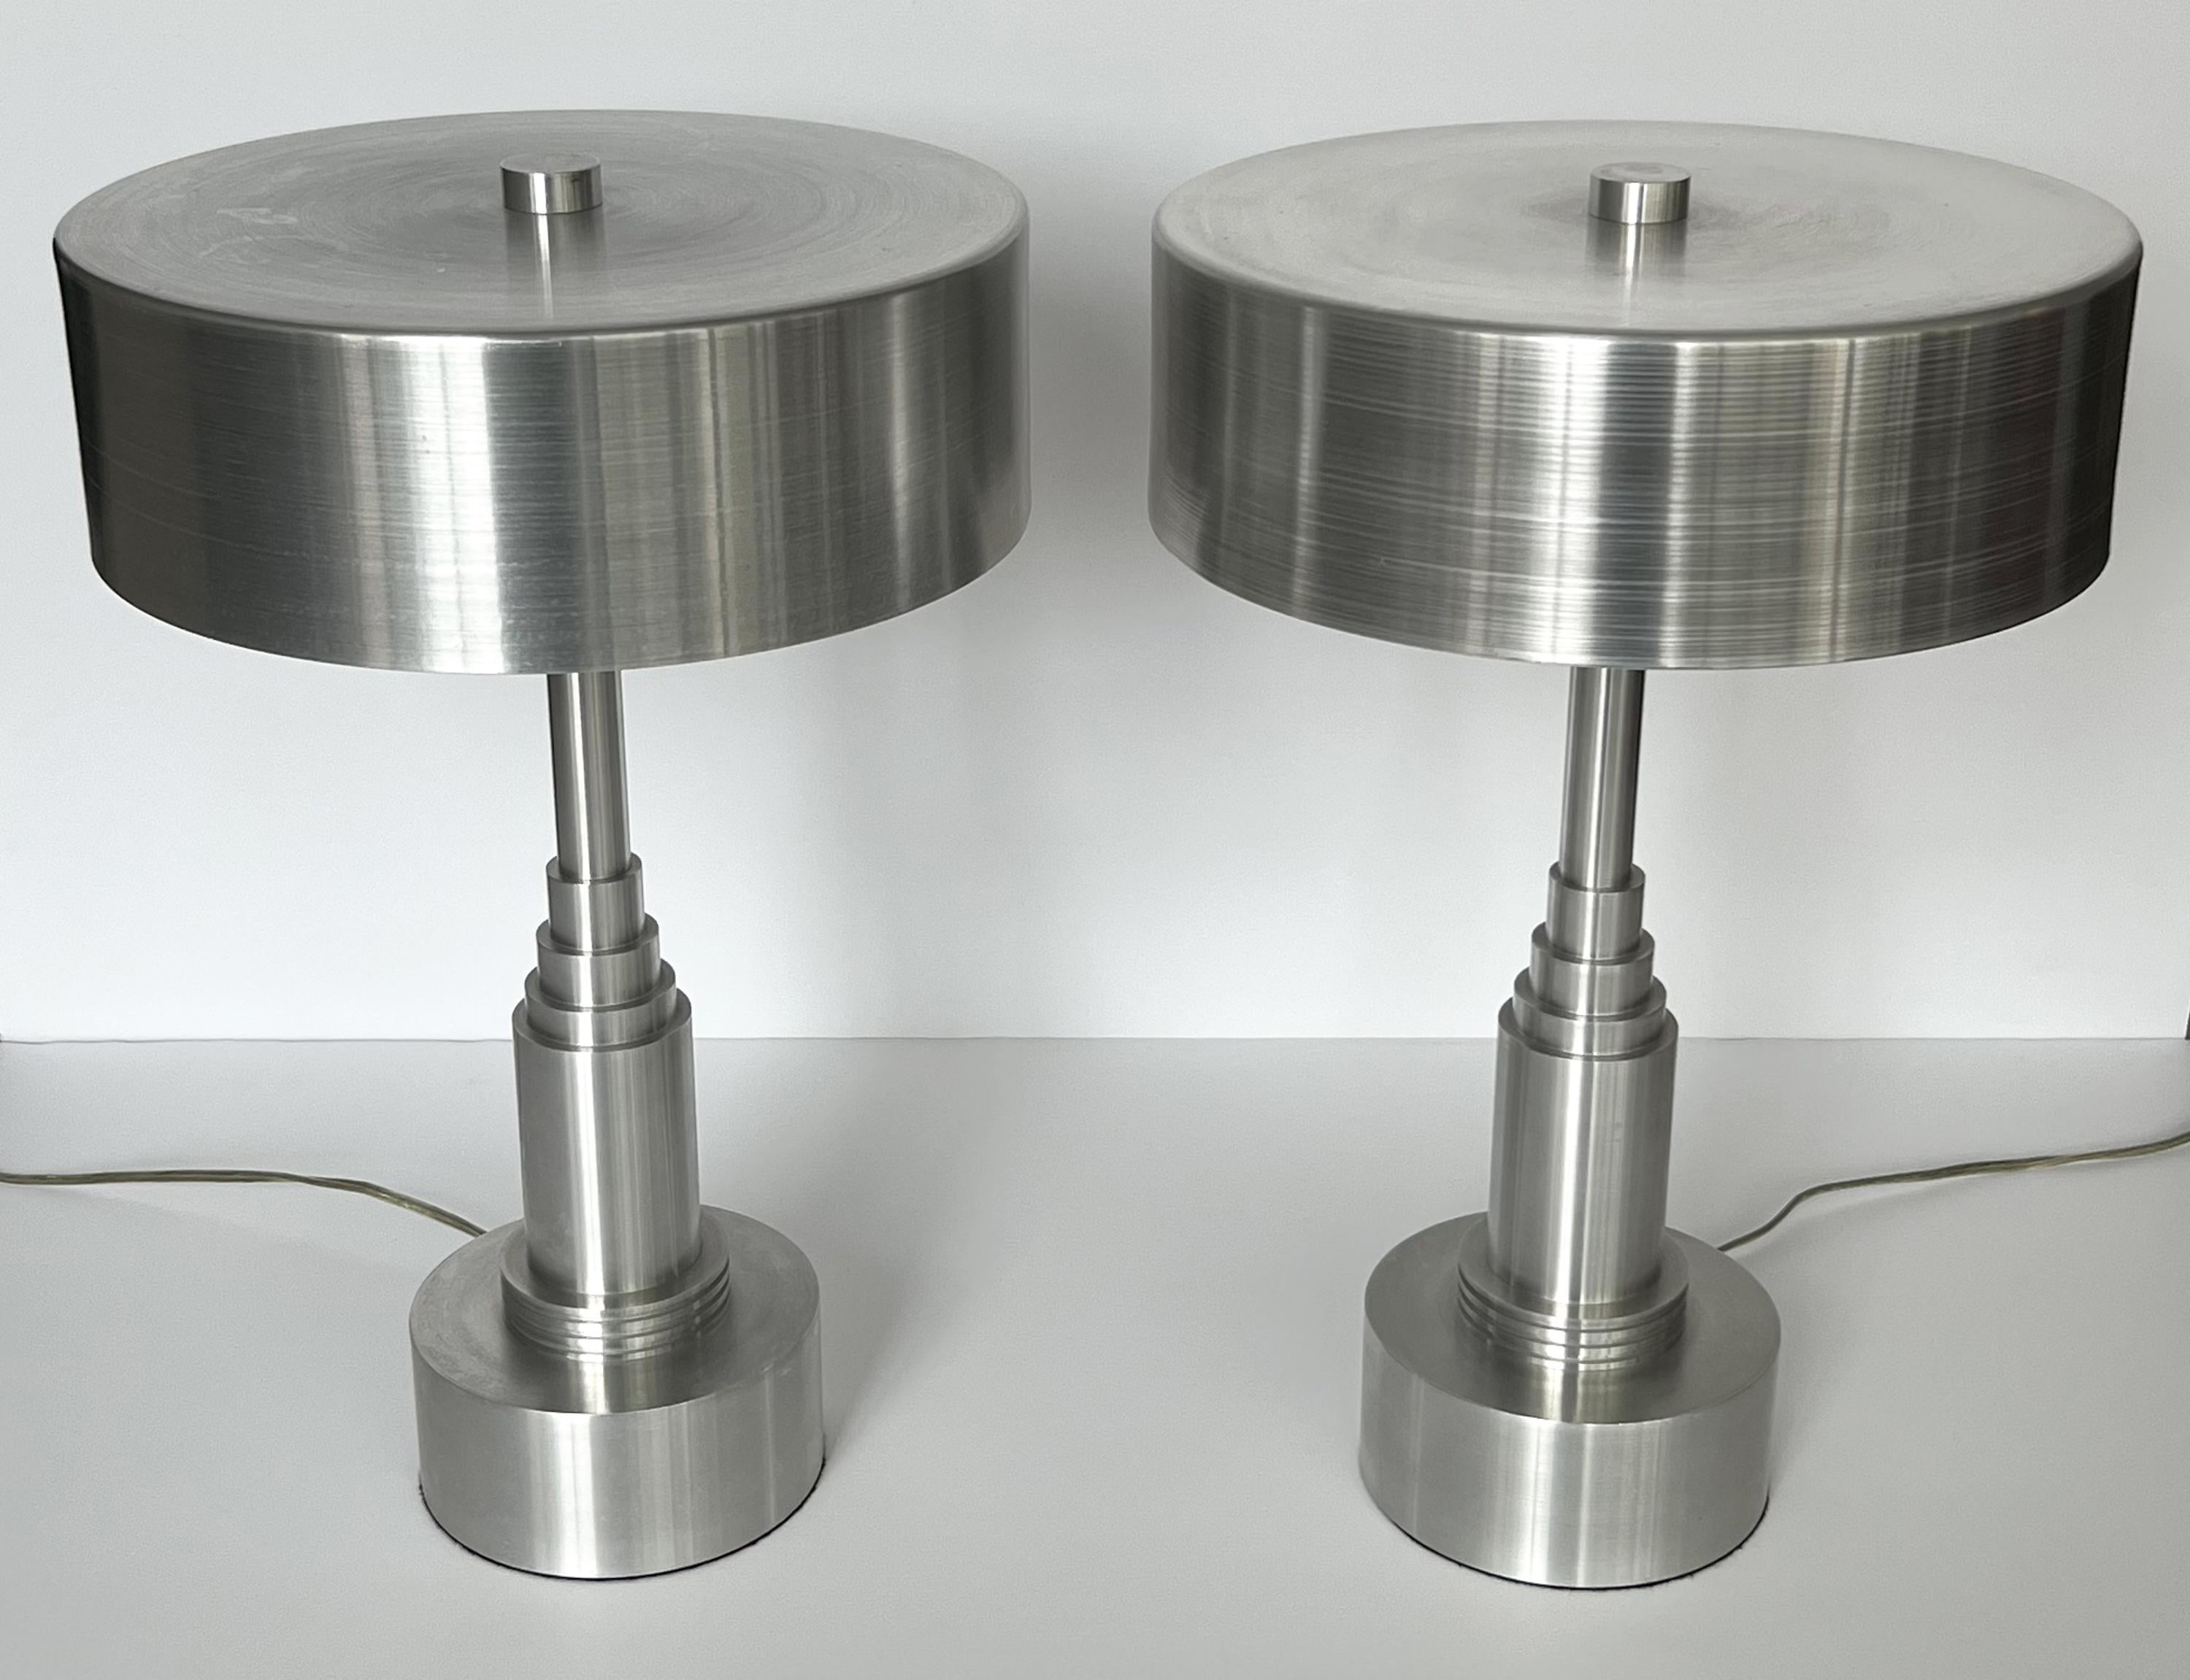 American Pair of Art Deco / Machine Age Table Lamps in the Manner of Walter Von Nessen